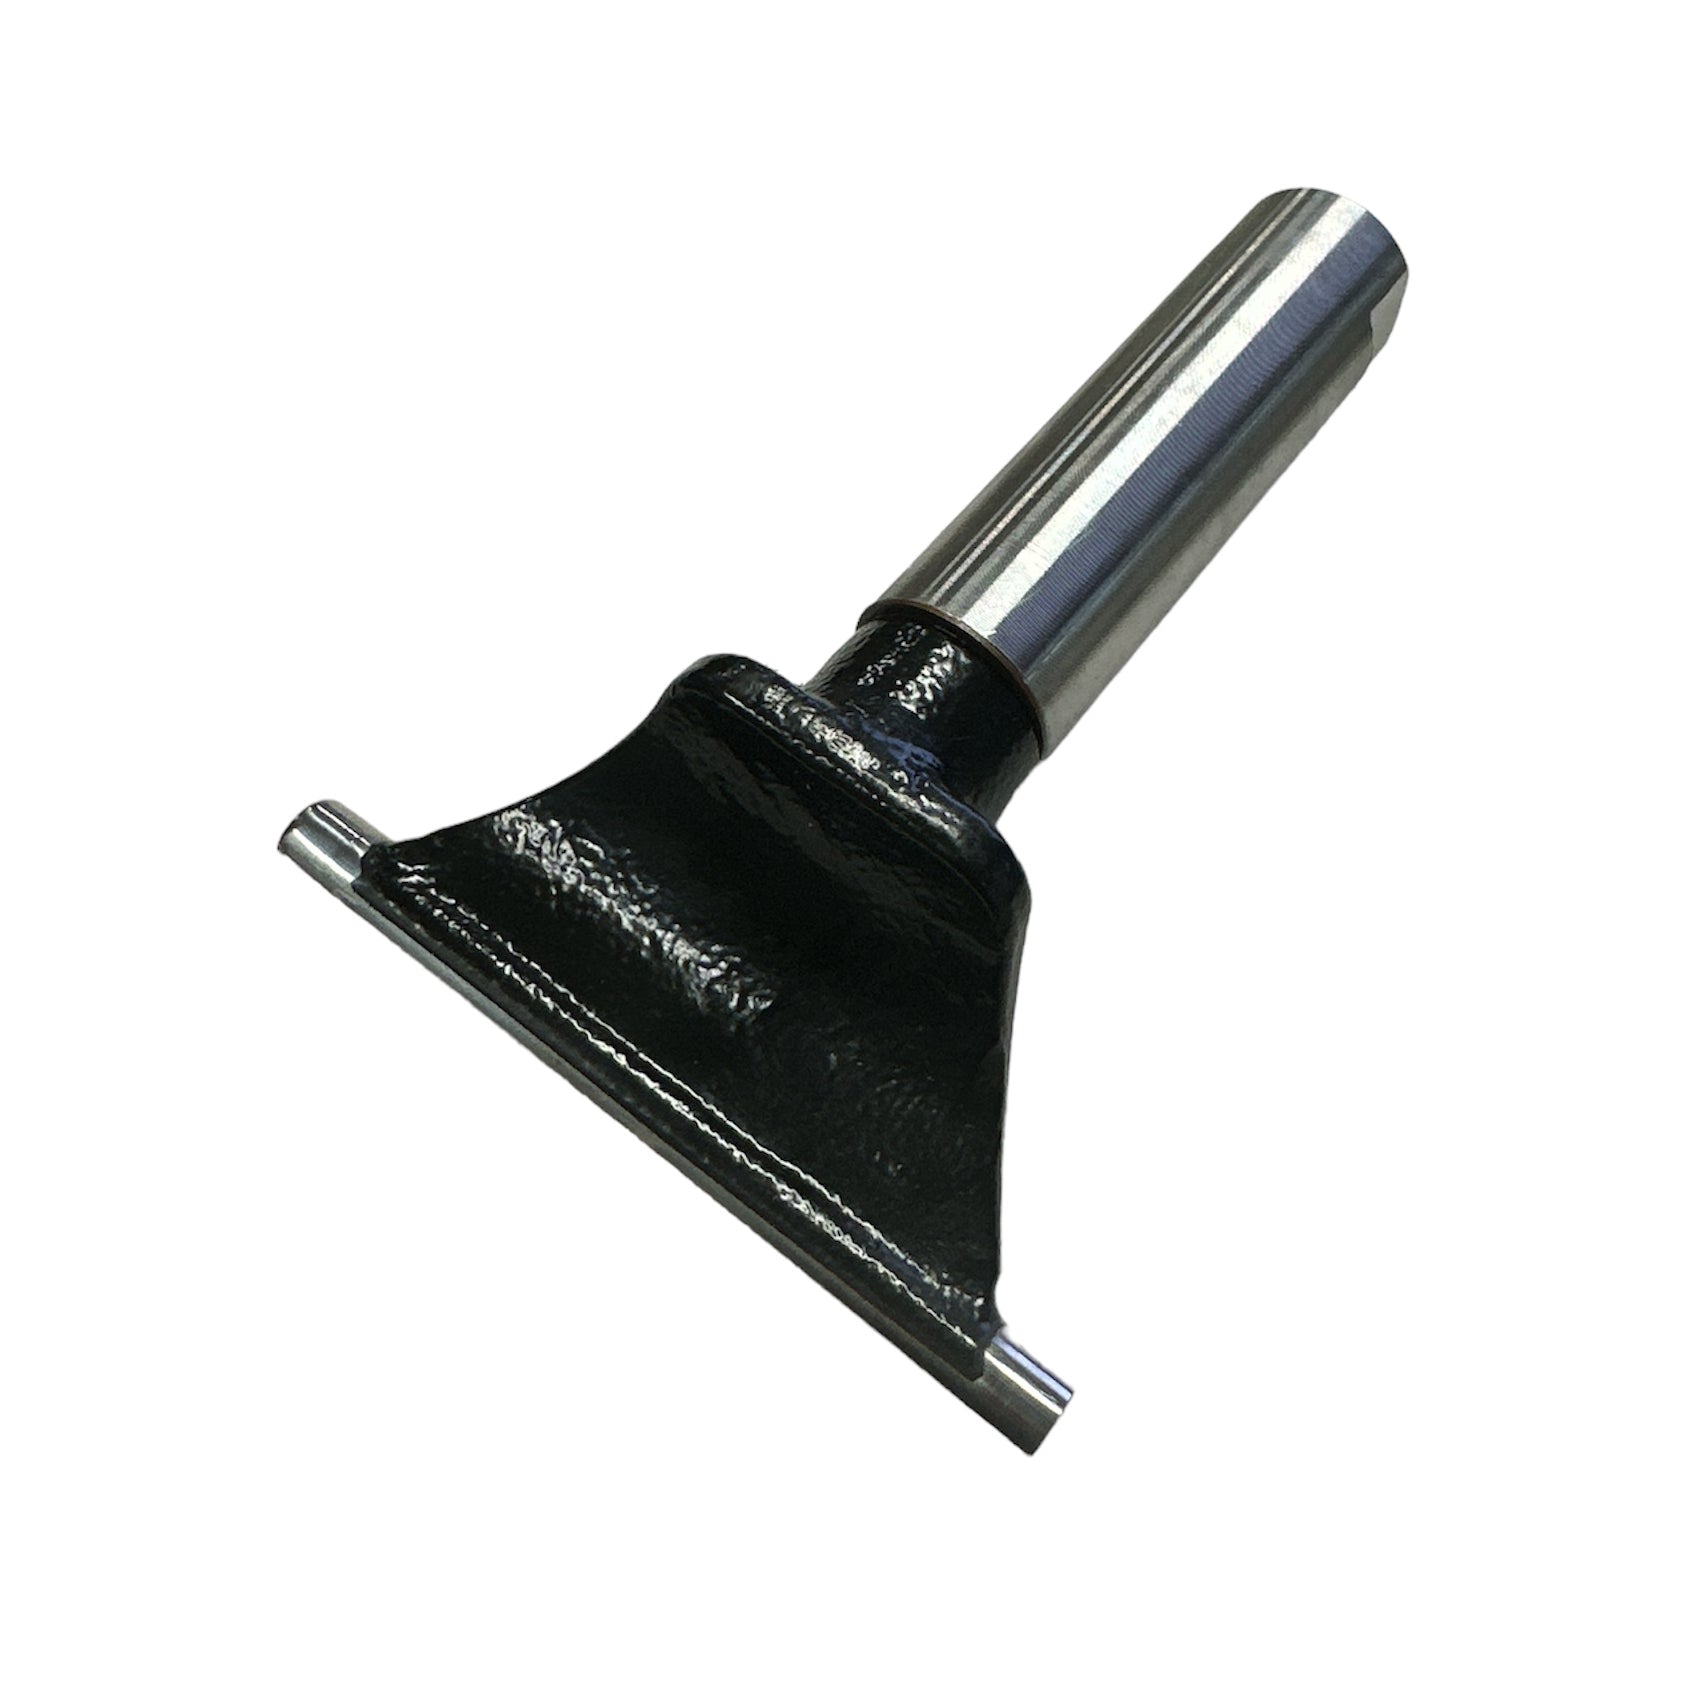 Universal Round Bar Tool Rest with 25.4mm (1") Post by Woodfast